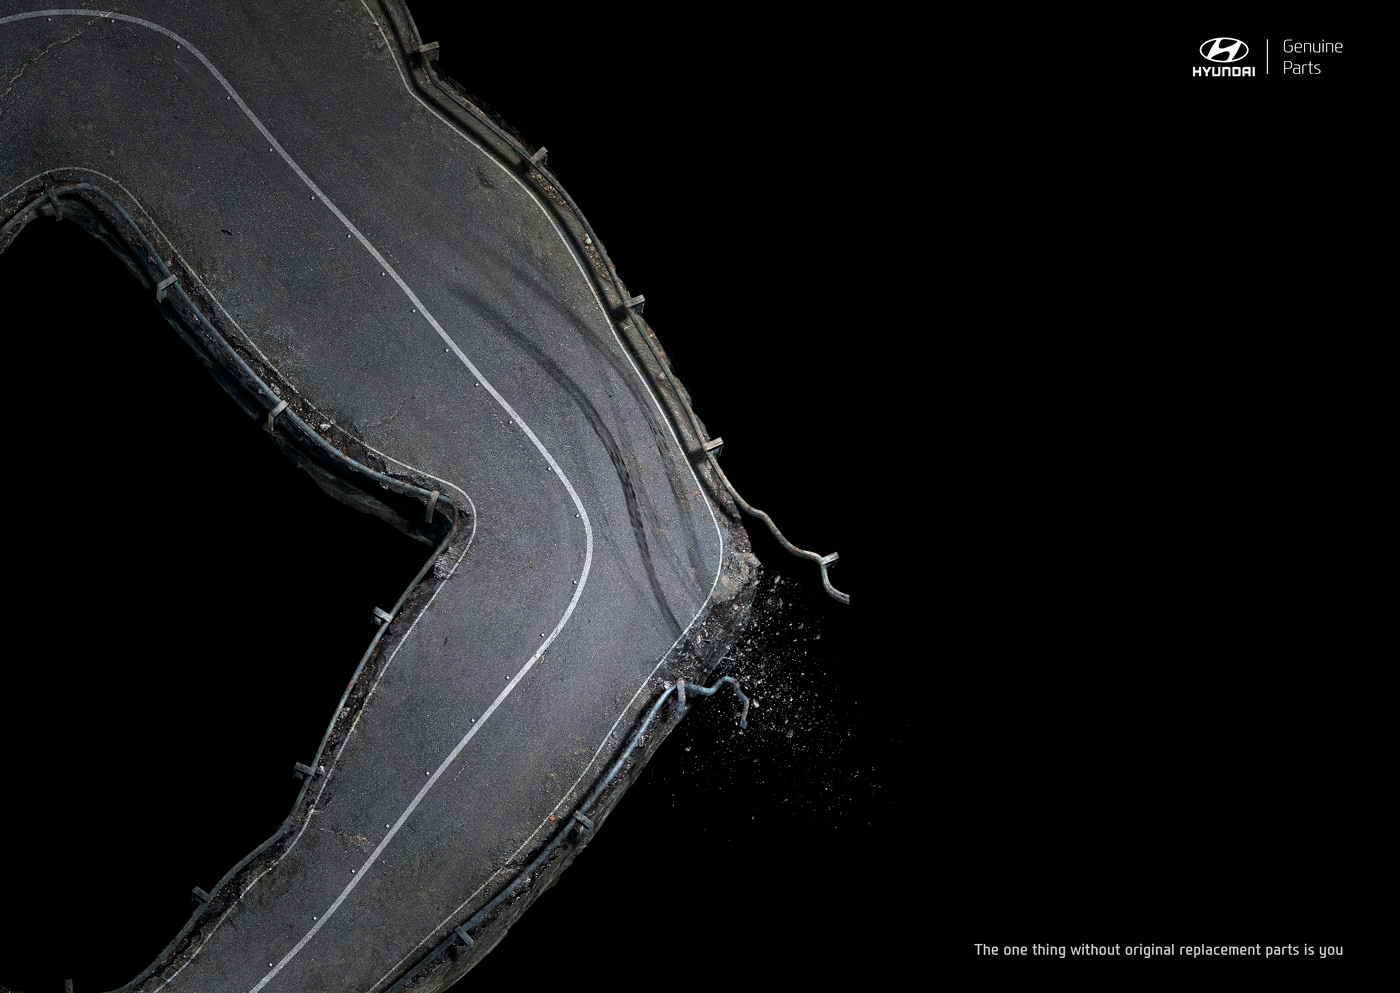 ads print Auto Parts Hyundai Cannes Cars Saatchi Advertising  Outdoor 3D